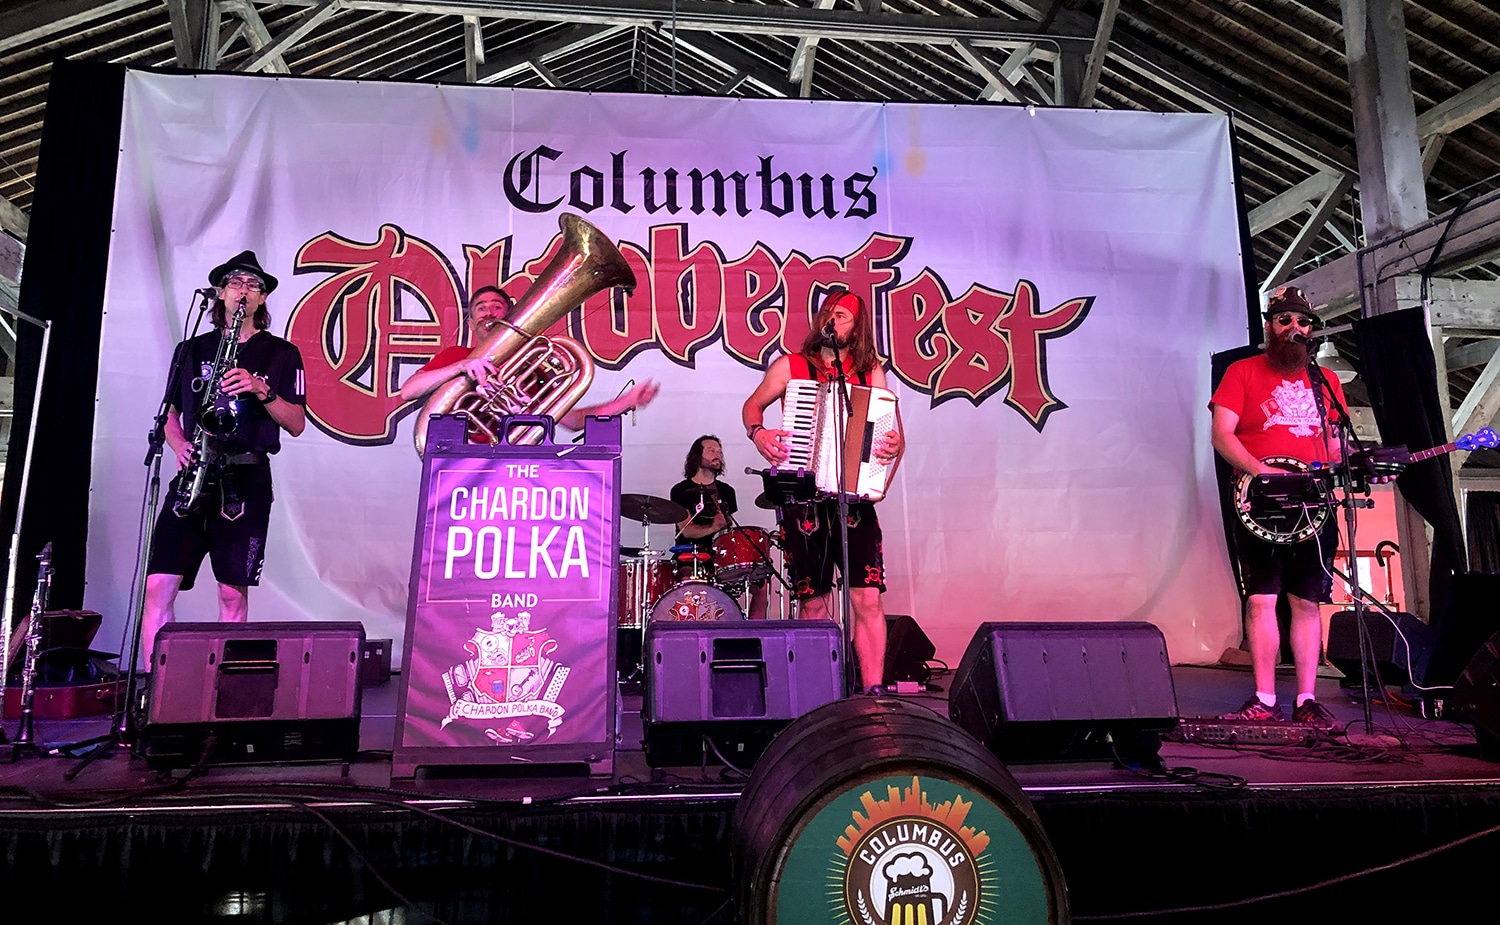 horizontal photo of the stage at the Columbus Oktoberfest with the Chardon Polka Band and a large silk backdrop with Columbus Oktoberfest on it. Image: Wikimedia Commons https://commons.wikimedia.org/wiki/File:Chardon_Polka_Band_-_Columbus_Oktoberfest.jpg